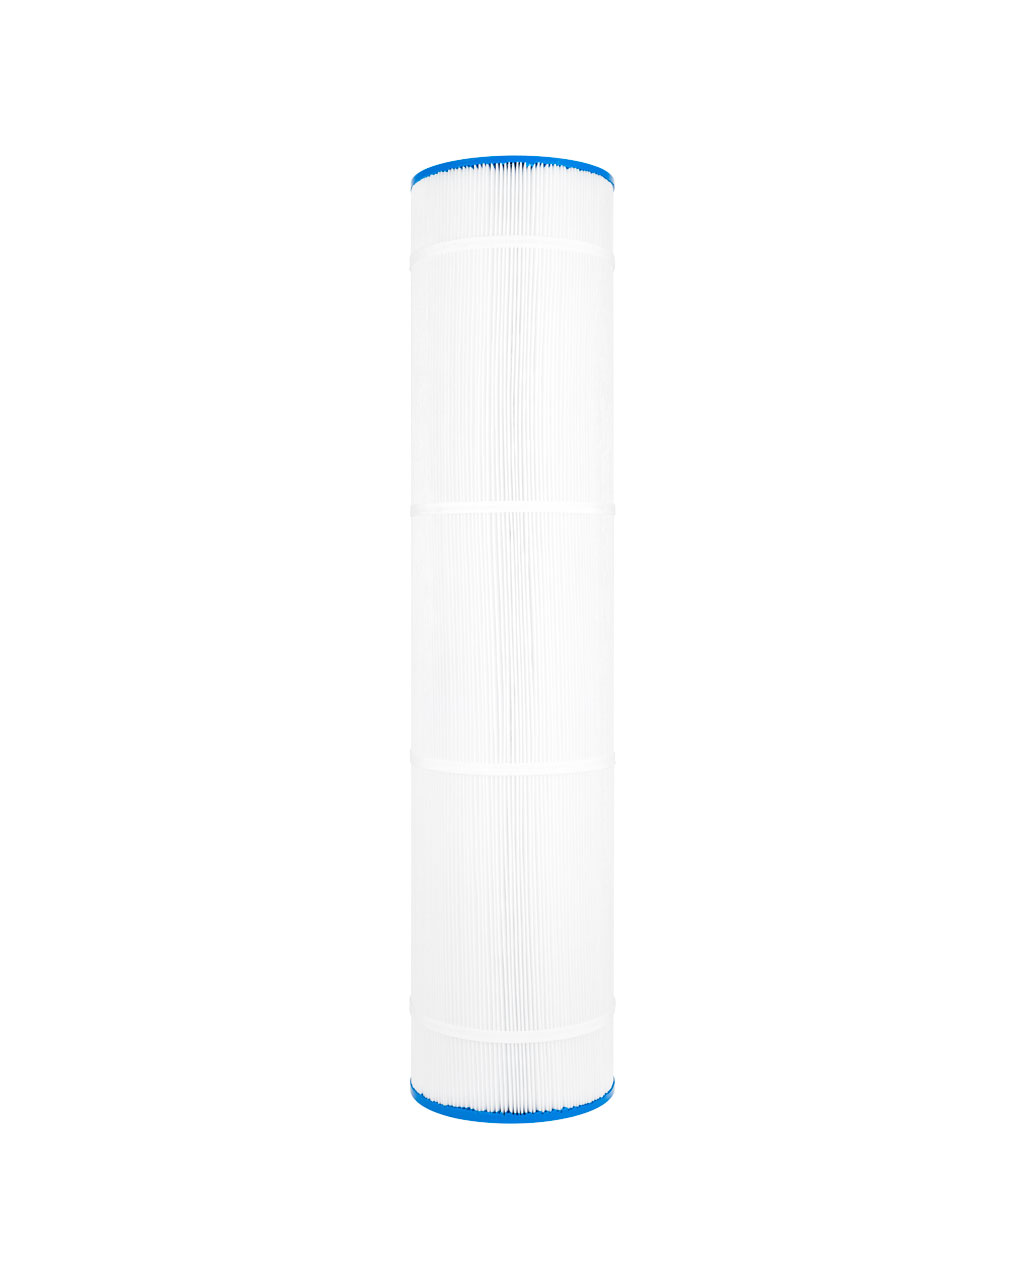 ClearChoice Replacement Pool Filter for Clean & Clear 175